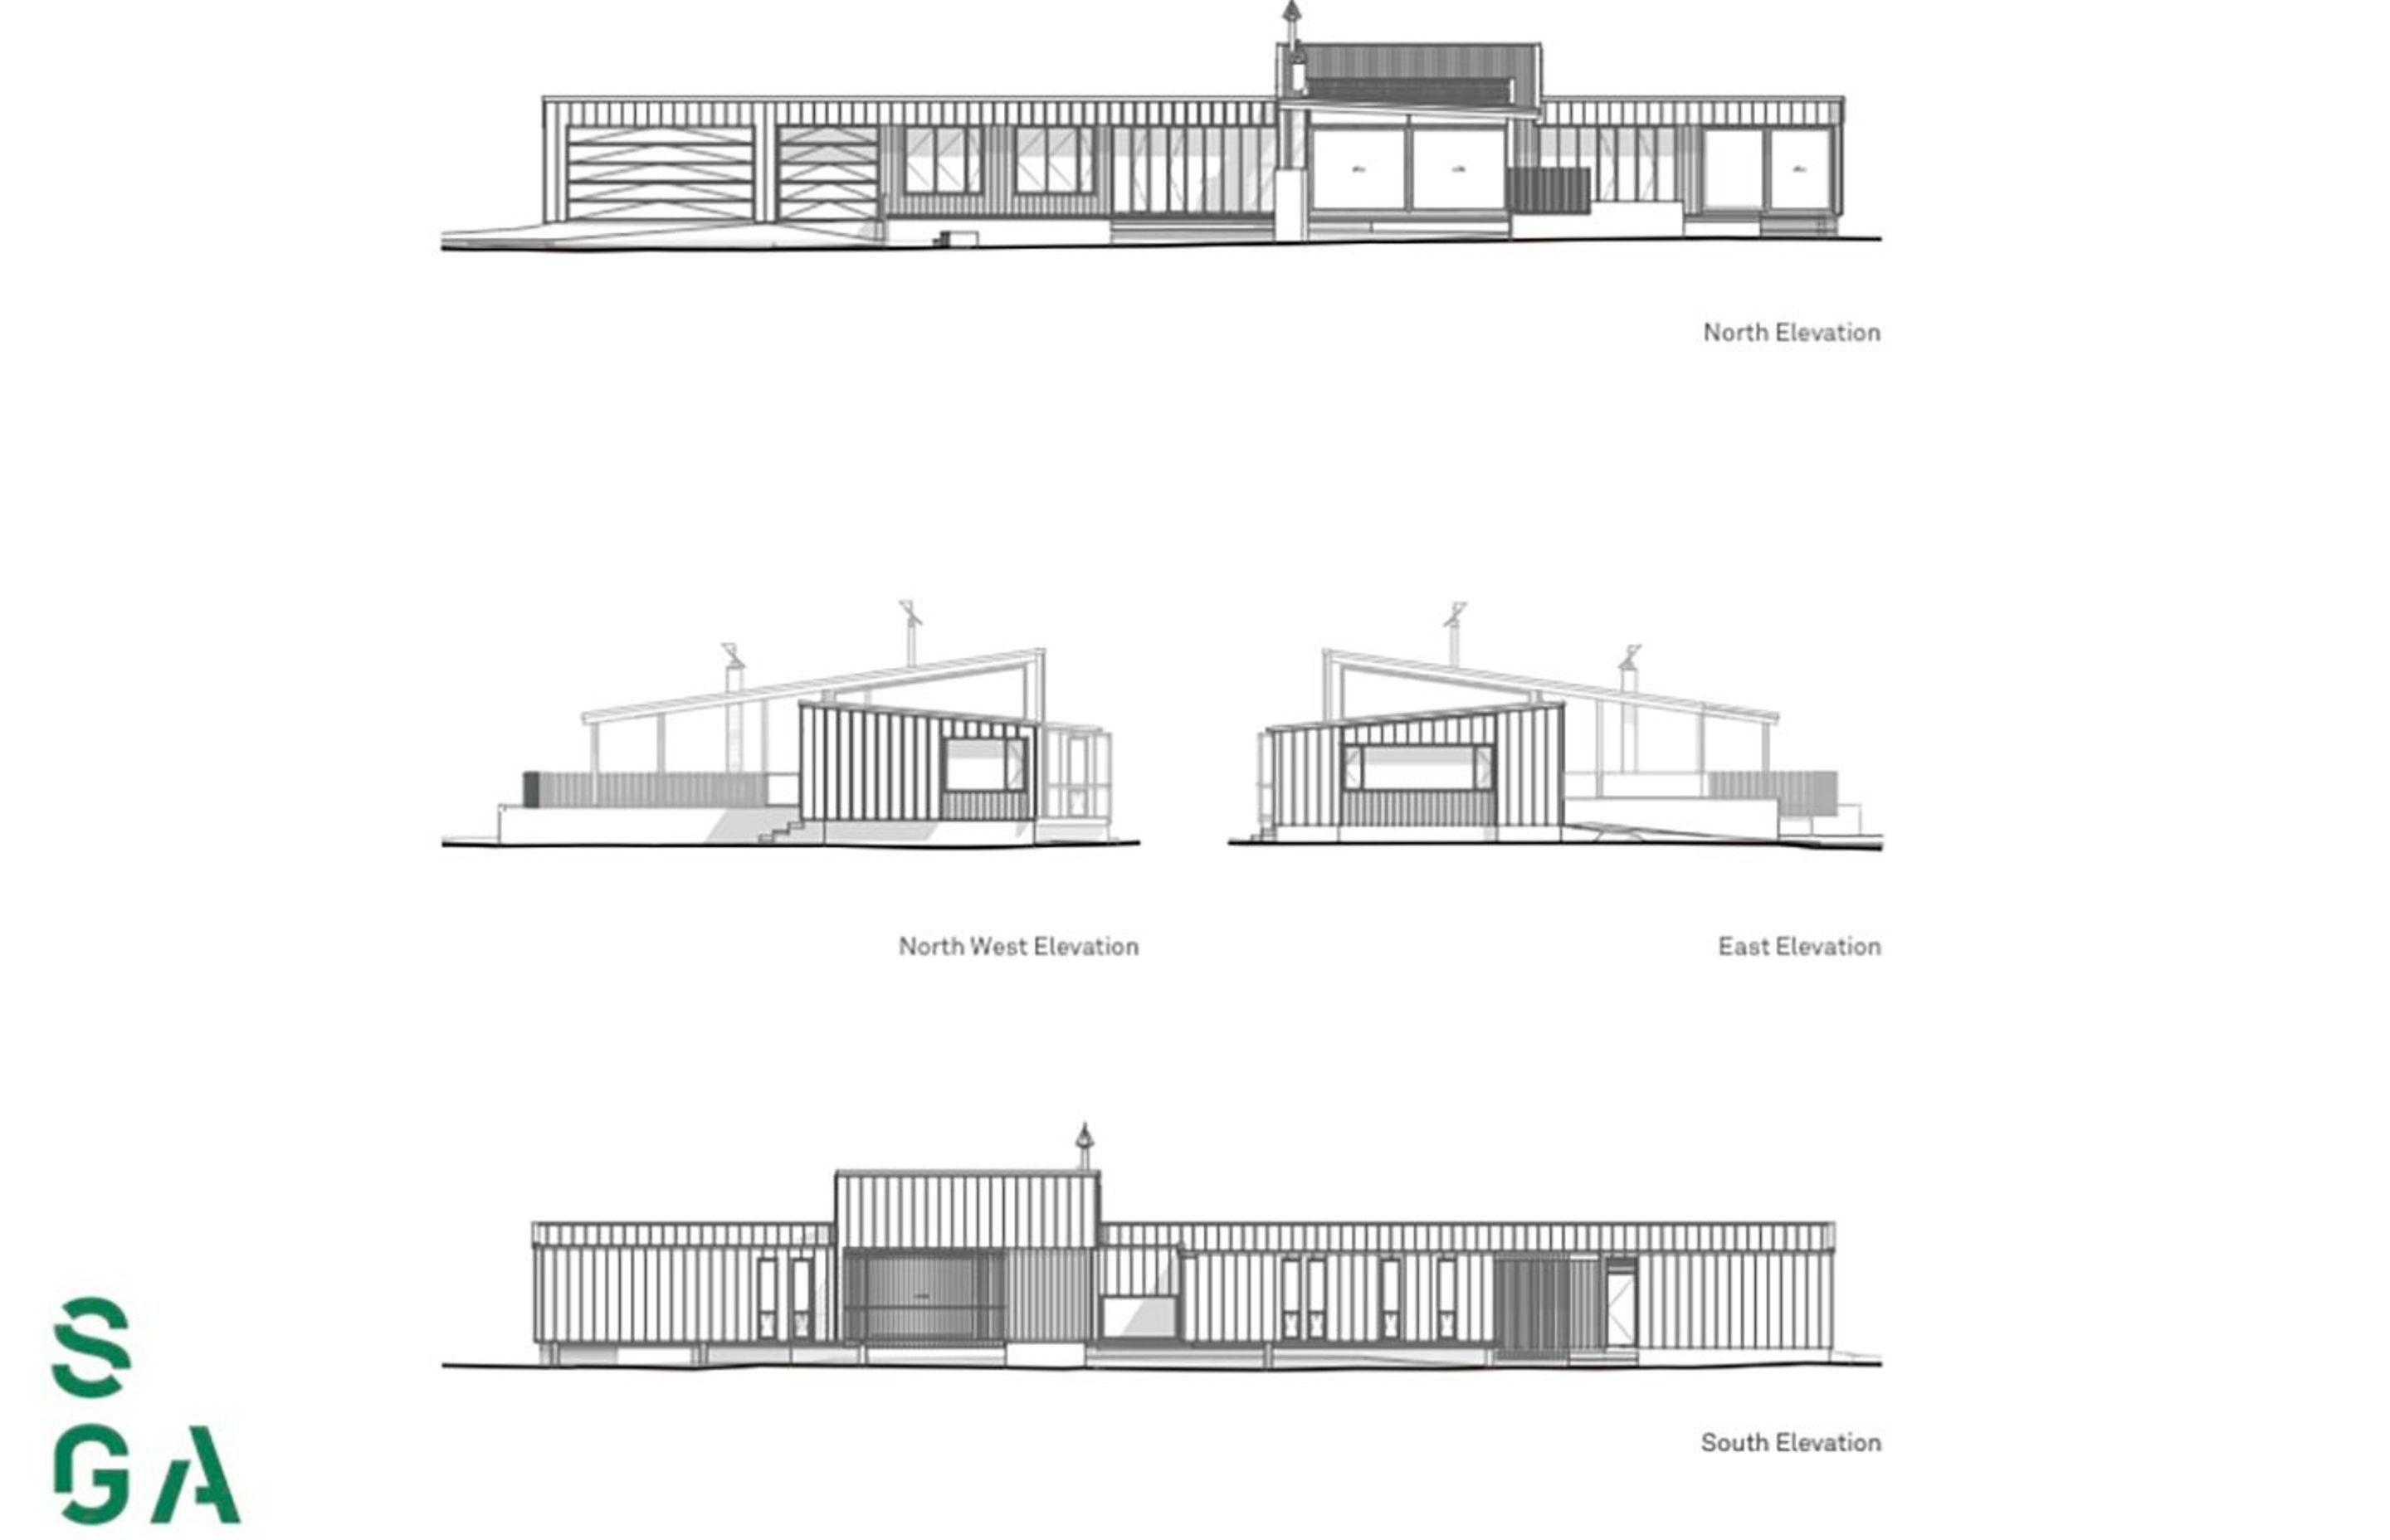 Elevations by SGA.